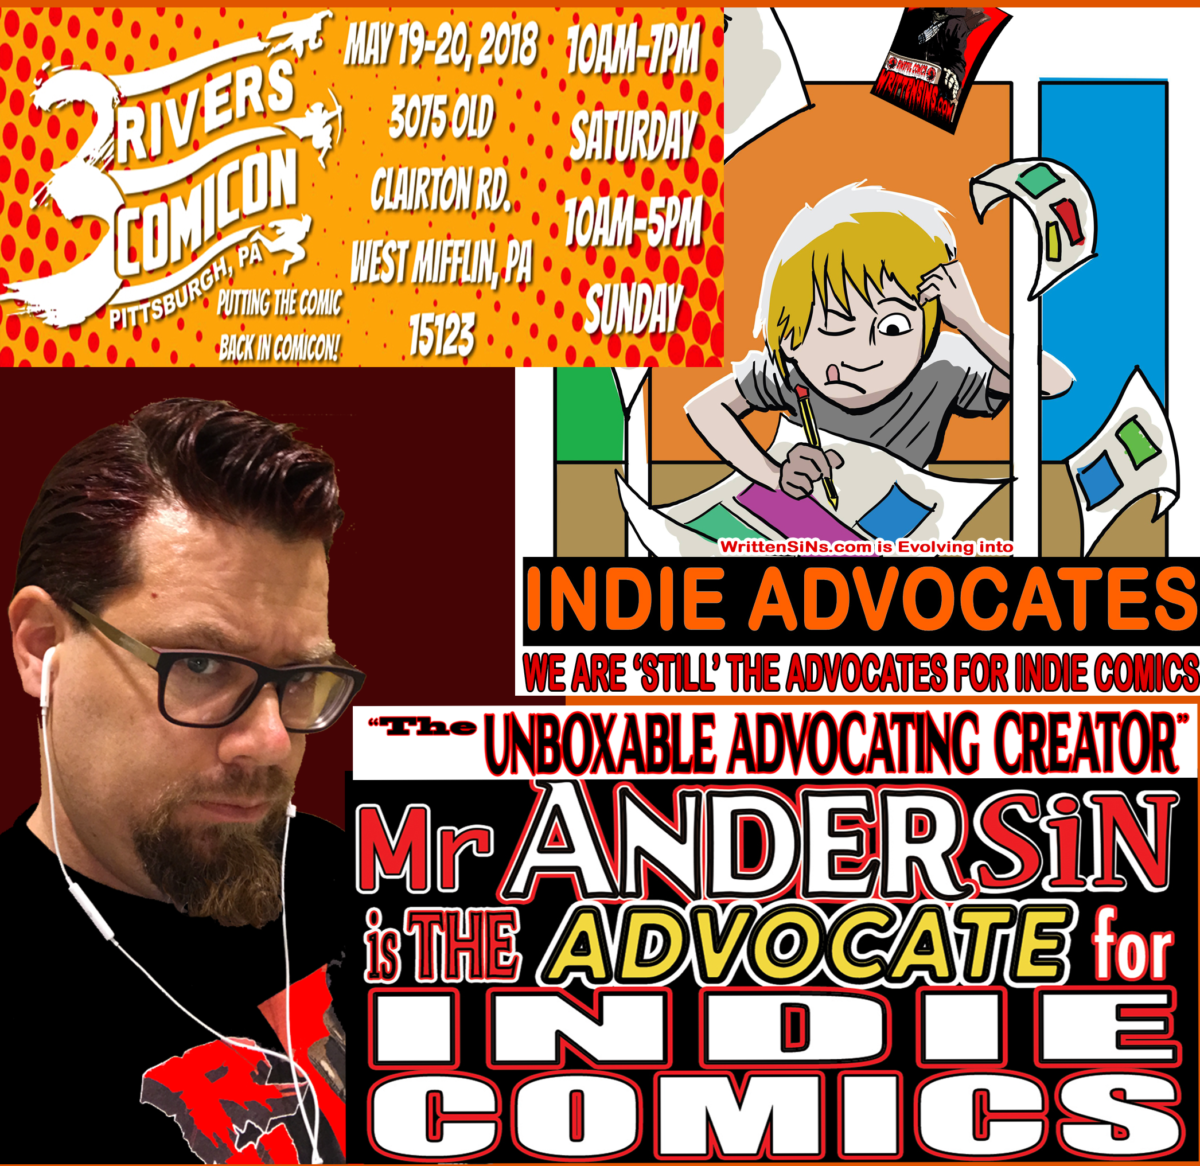 COMIC CON HIGHWAY EXITING with INDIE ADVOCATING  in NORTHEAST:: -PA-WrittenSiNs heads to 3 Rivers Comic Con May 19-20